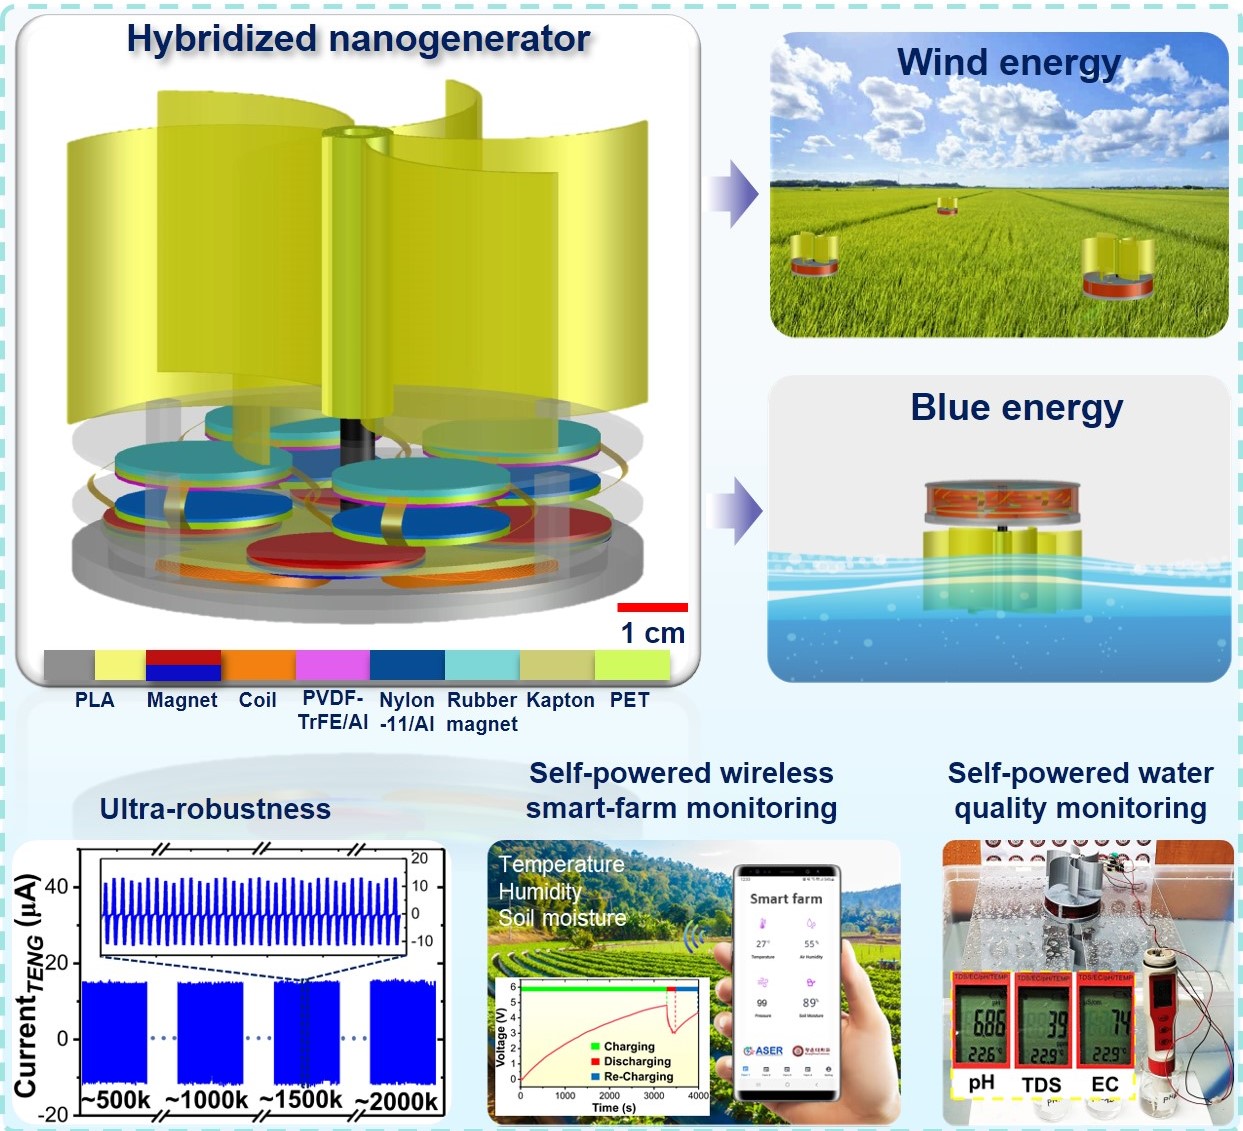 Ultra-robust and broadband rotary hybridized nanogenerator for self-sustained smart-farming applications